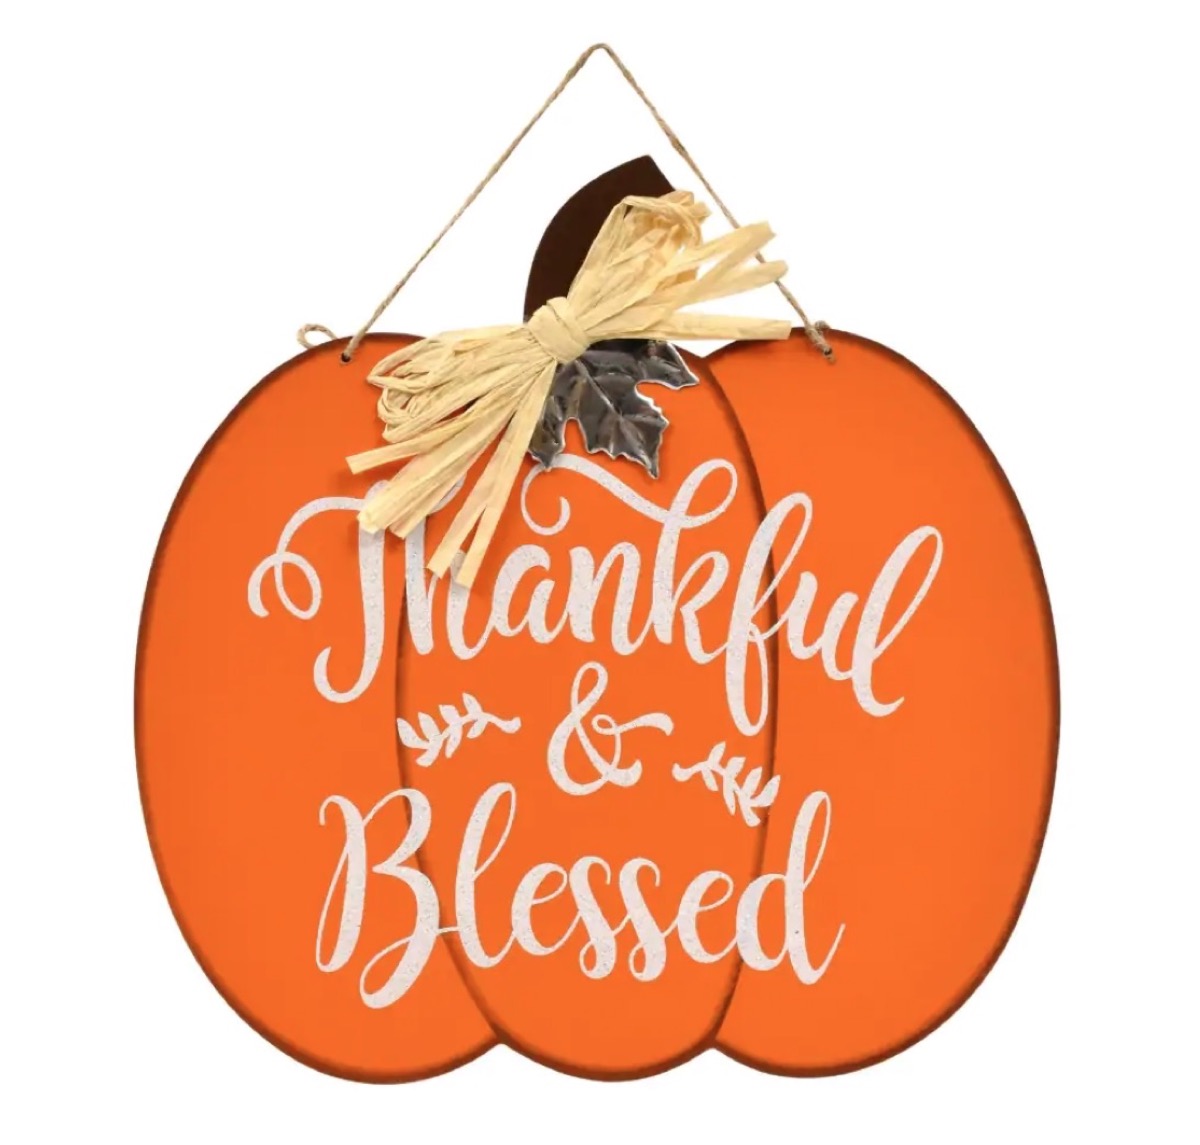 pumpkin with "thankful and blessed" written on it in script, dollar store fall decor